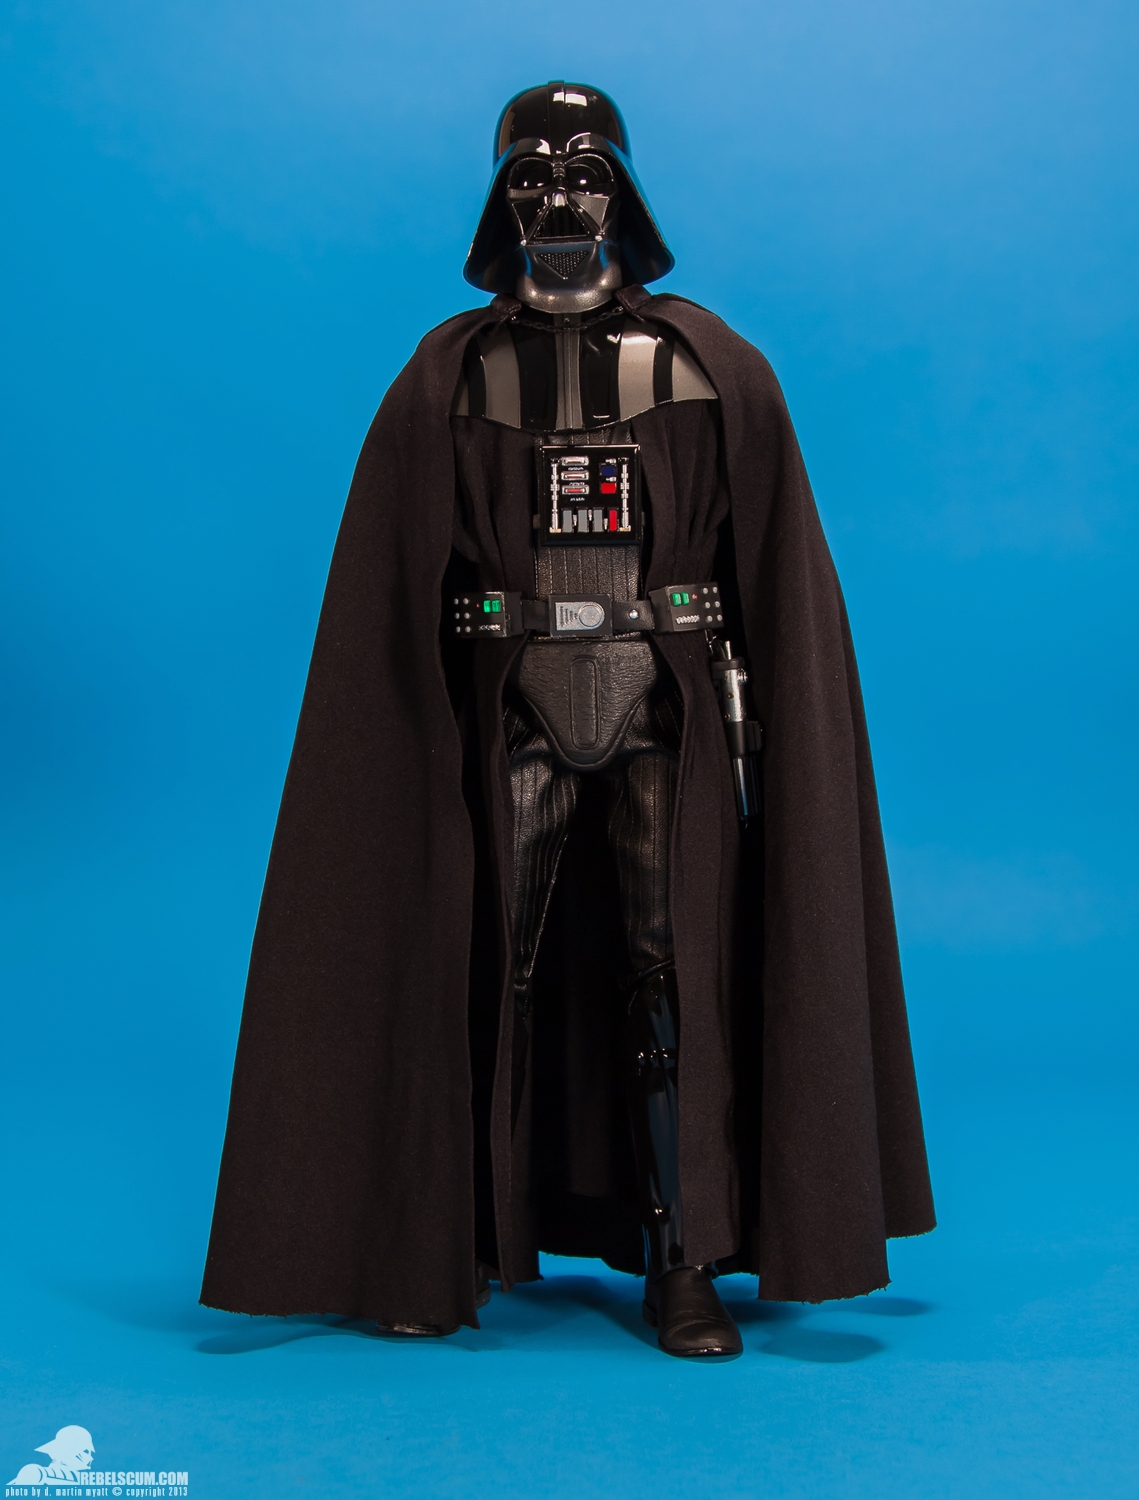 Darth-Vader-Return-Of-The-Jedi-Sixth-Scale-Sideshow-Collectibles-001.jpg